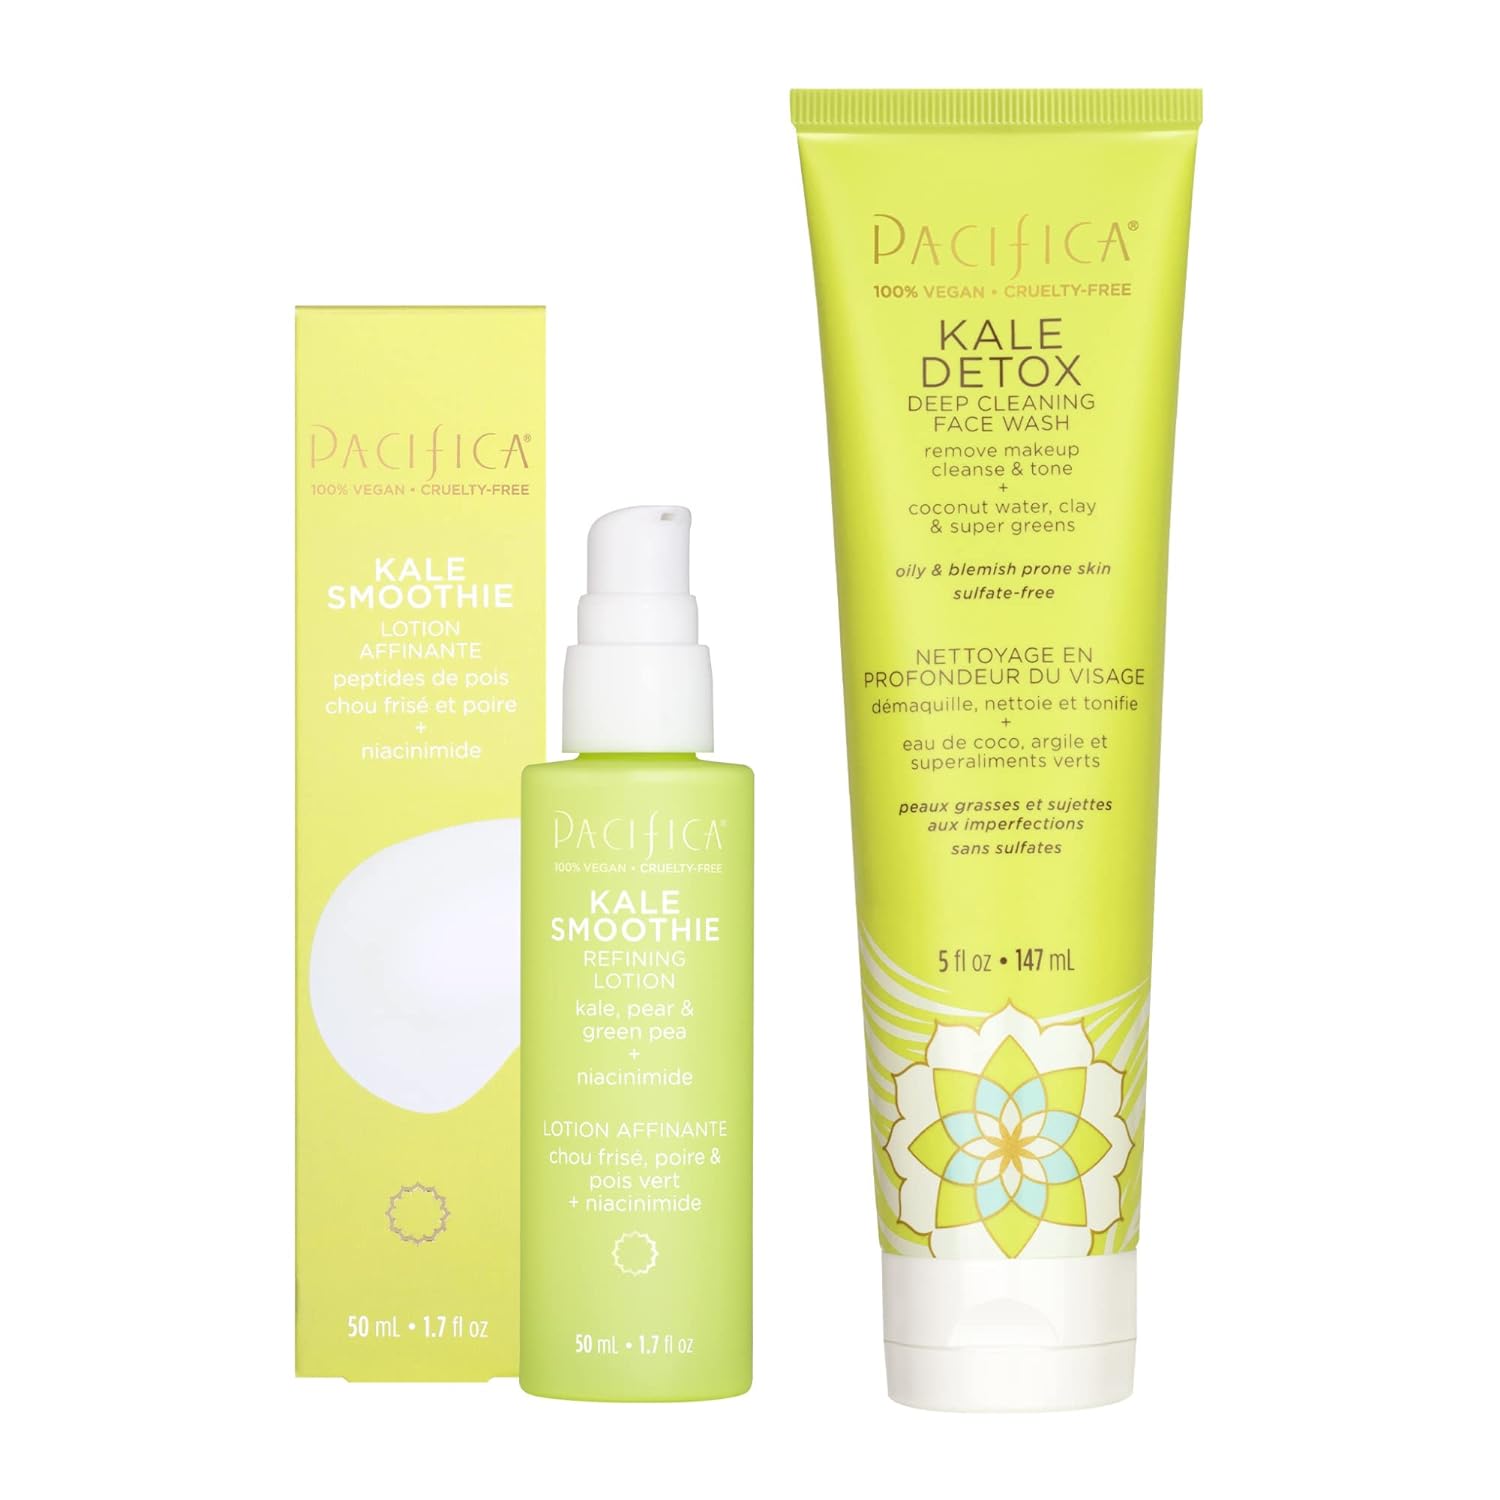 Pacifica Beauty, Kale Detox Deep Cleansing Daily Face Wash + Smoothie Refining Lotion, Face Moisturizer, Oily Skin, Redness, Pore, Texture, Tone, Aloe, Niacinamide, Vegan & Cruelty Free